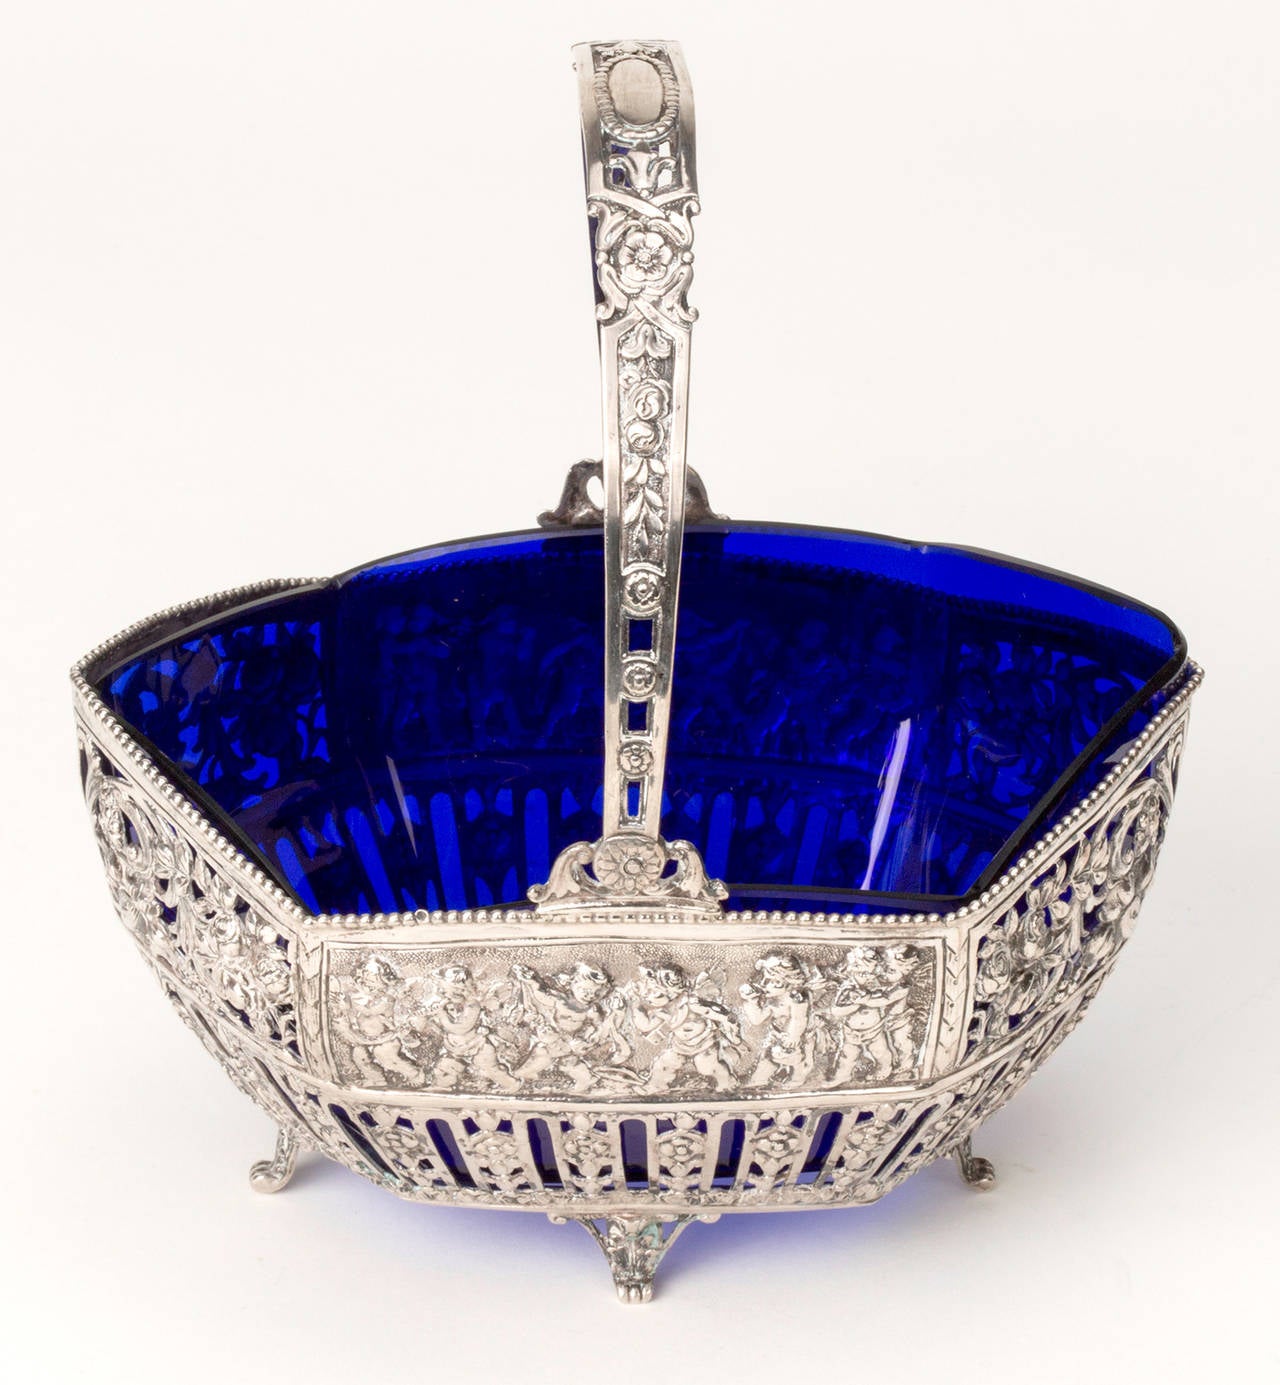 Continental 835 Silver pierced basket with handle.  Decorated with reposse of cherubs  around the basket.  Original cobalt blue glass liner.  C. 1900s